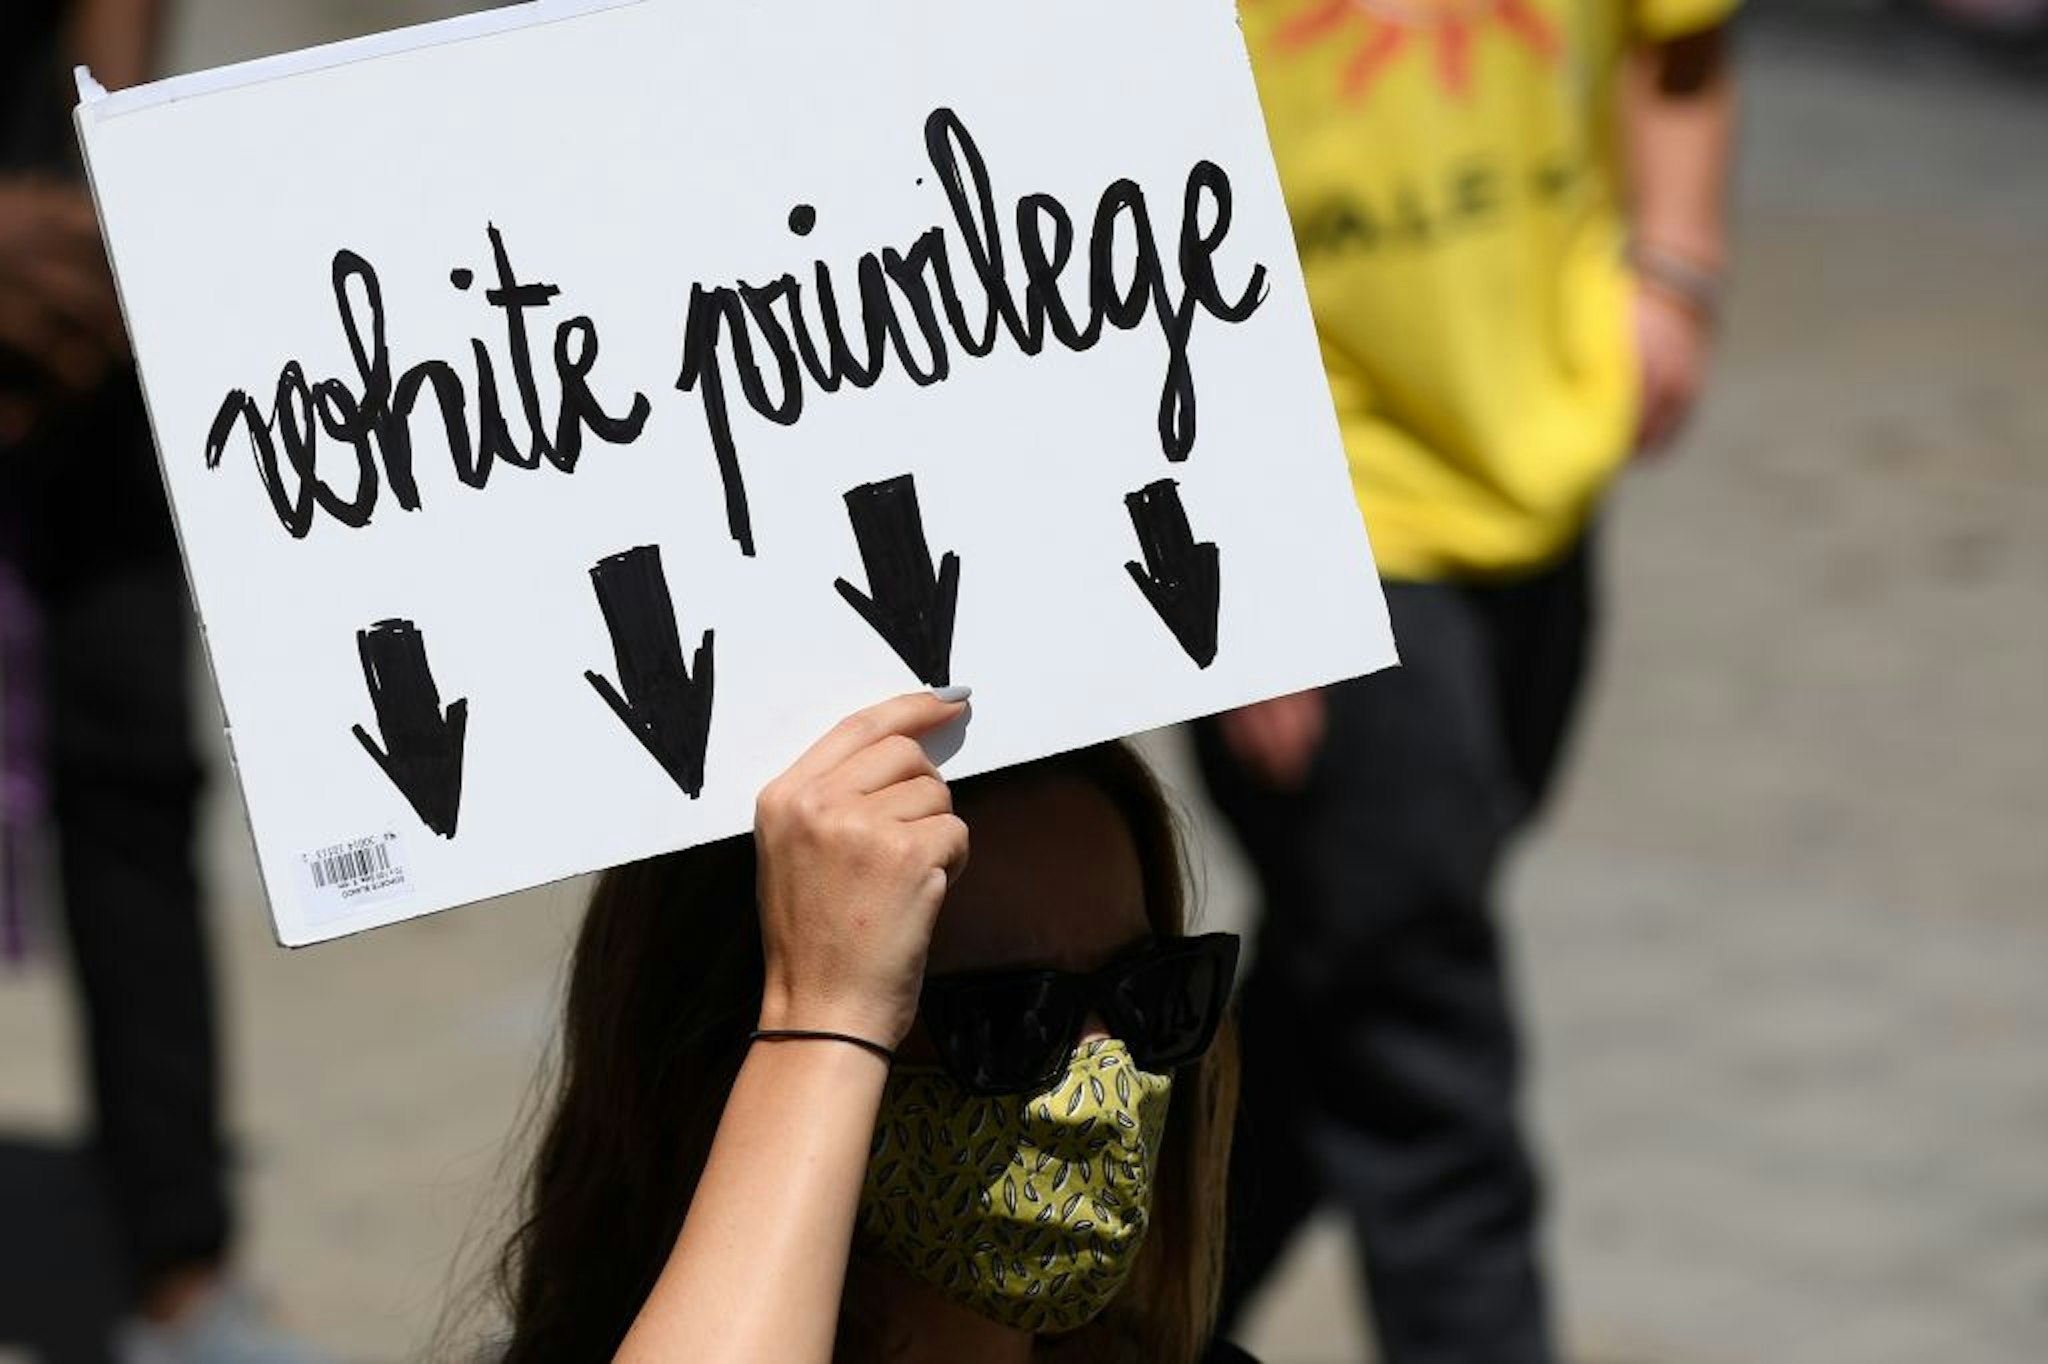 A woman holds a placard reading "White privilege" during a demonstration on June 14, 2020, in Barcelona, as part of the worldwide protests against racism and police brutality. - The protests are part of a worldwide movement following the killing in the United States of African-American man George Floyd who died after a white policeman knelt on his neck for several minutes. (Photo by Josep LAGO / AFP) (Photo by JOSEP LAGO/AFP via Getty Images)